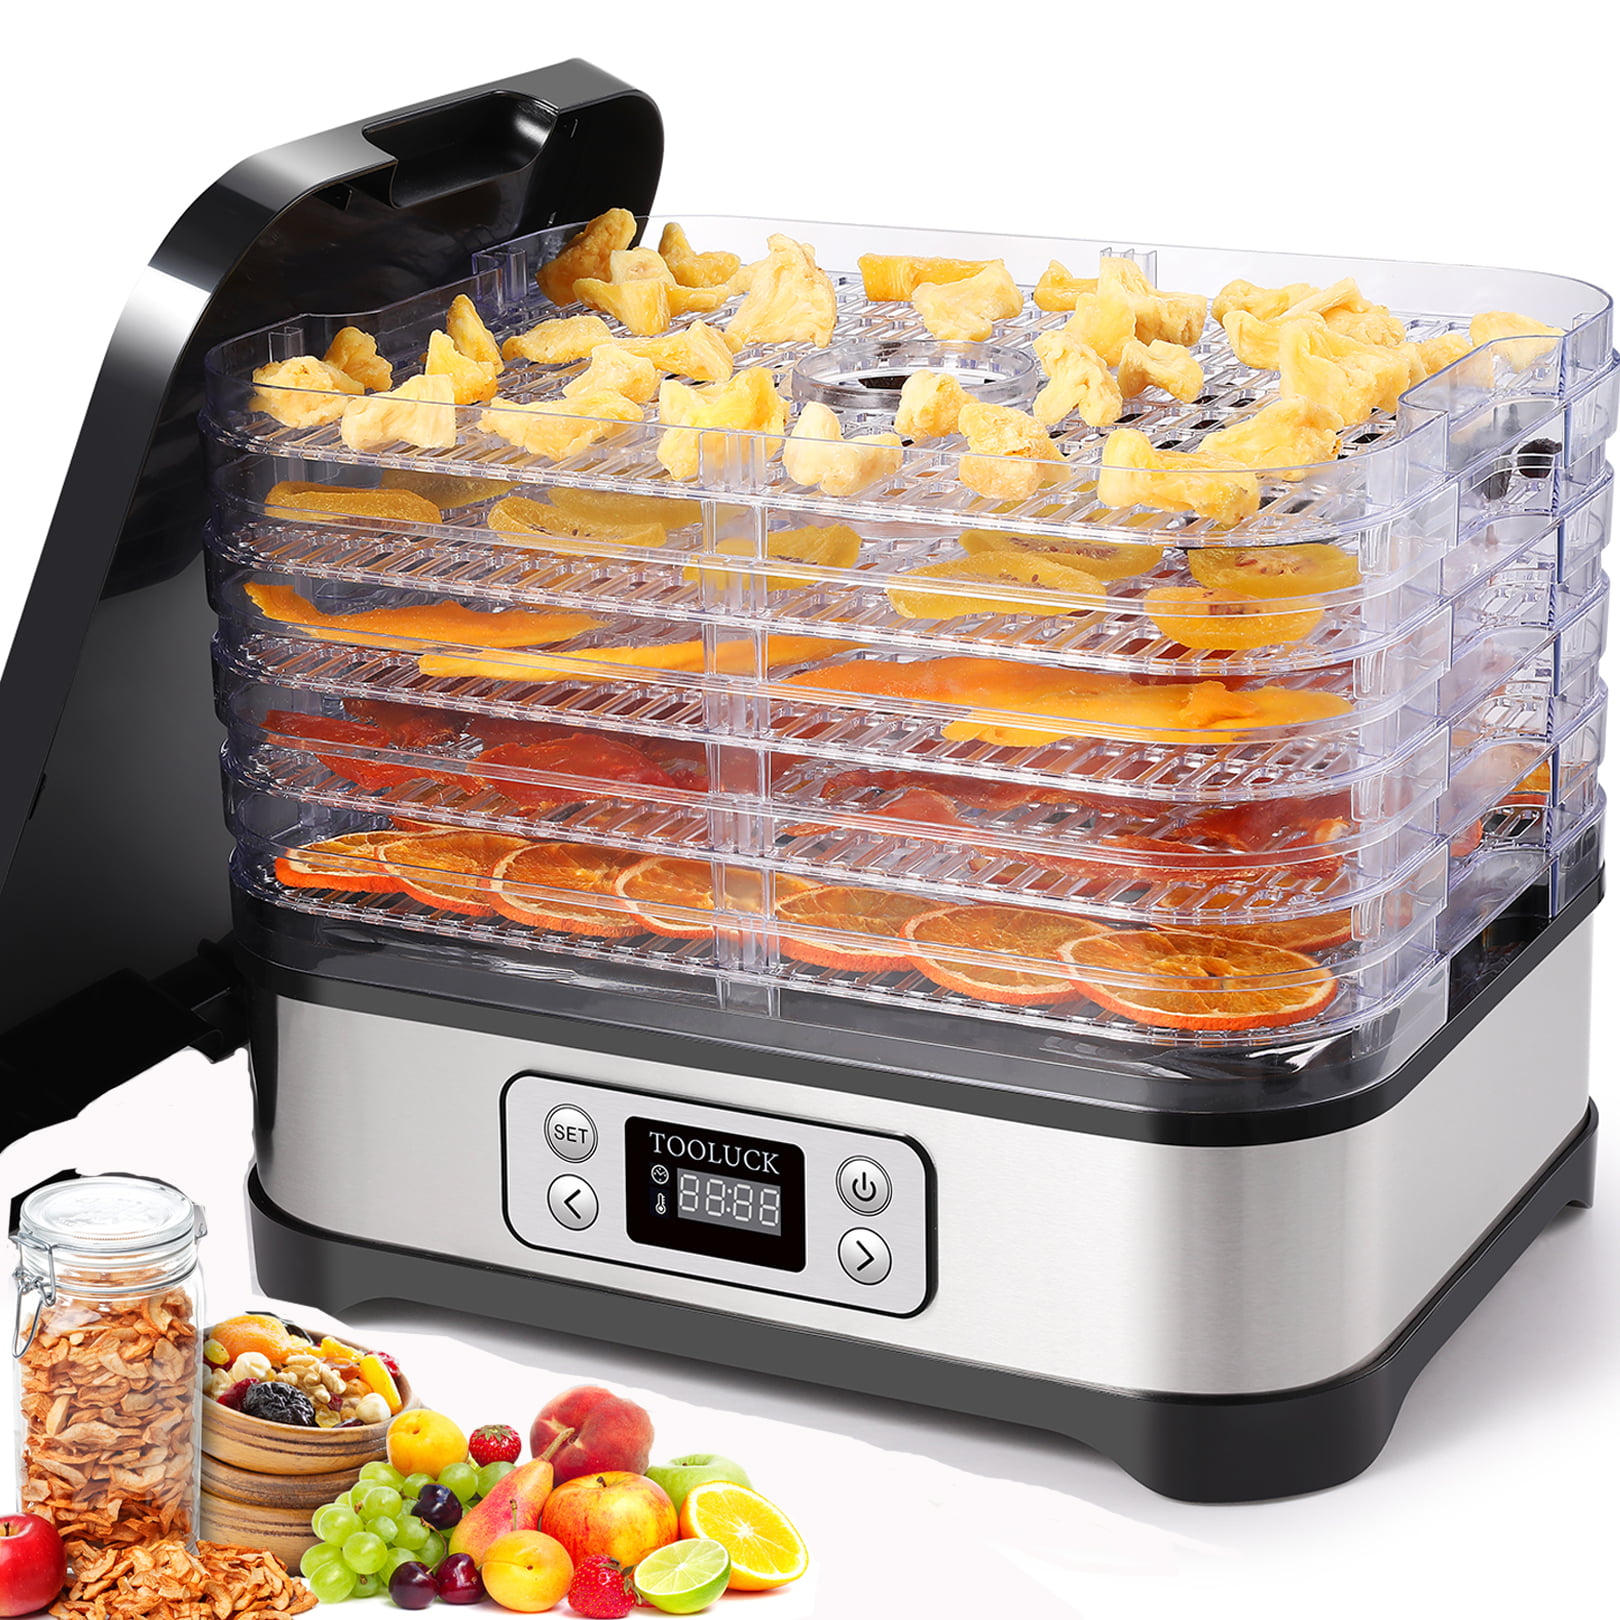 Details about   5 8 Trays Electric Food Dehydrator Machine Home Fruit Jerky Beef Meat Dryer e 74 